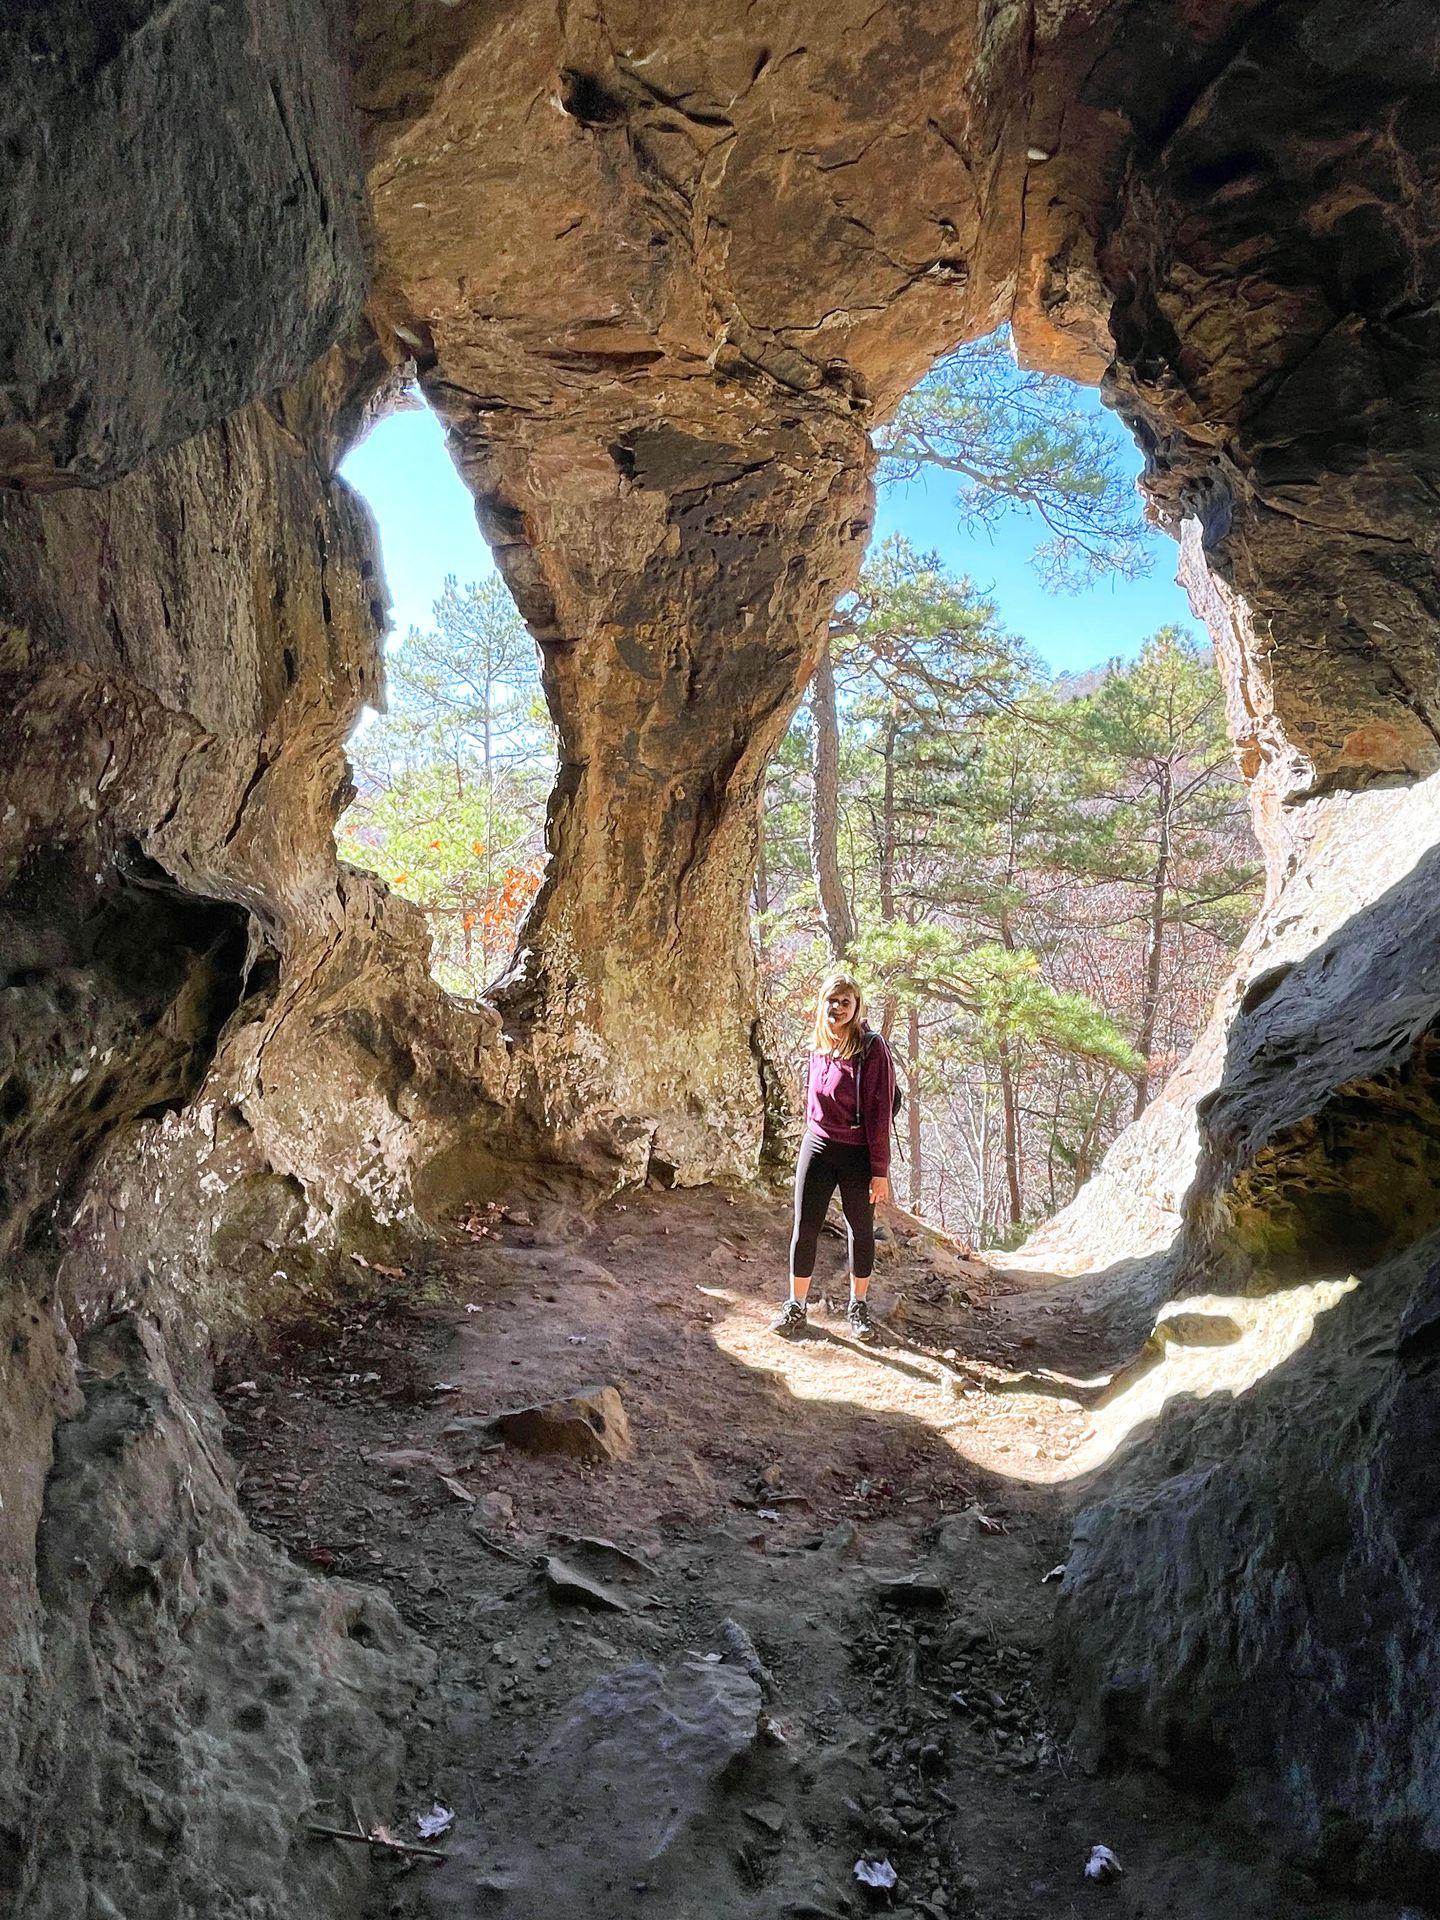 Lydia standing in a cave area with two arches behind her.